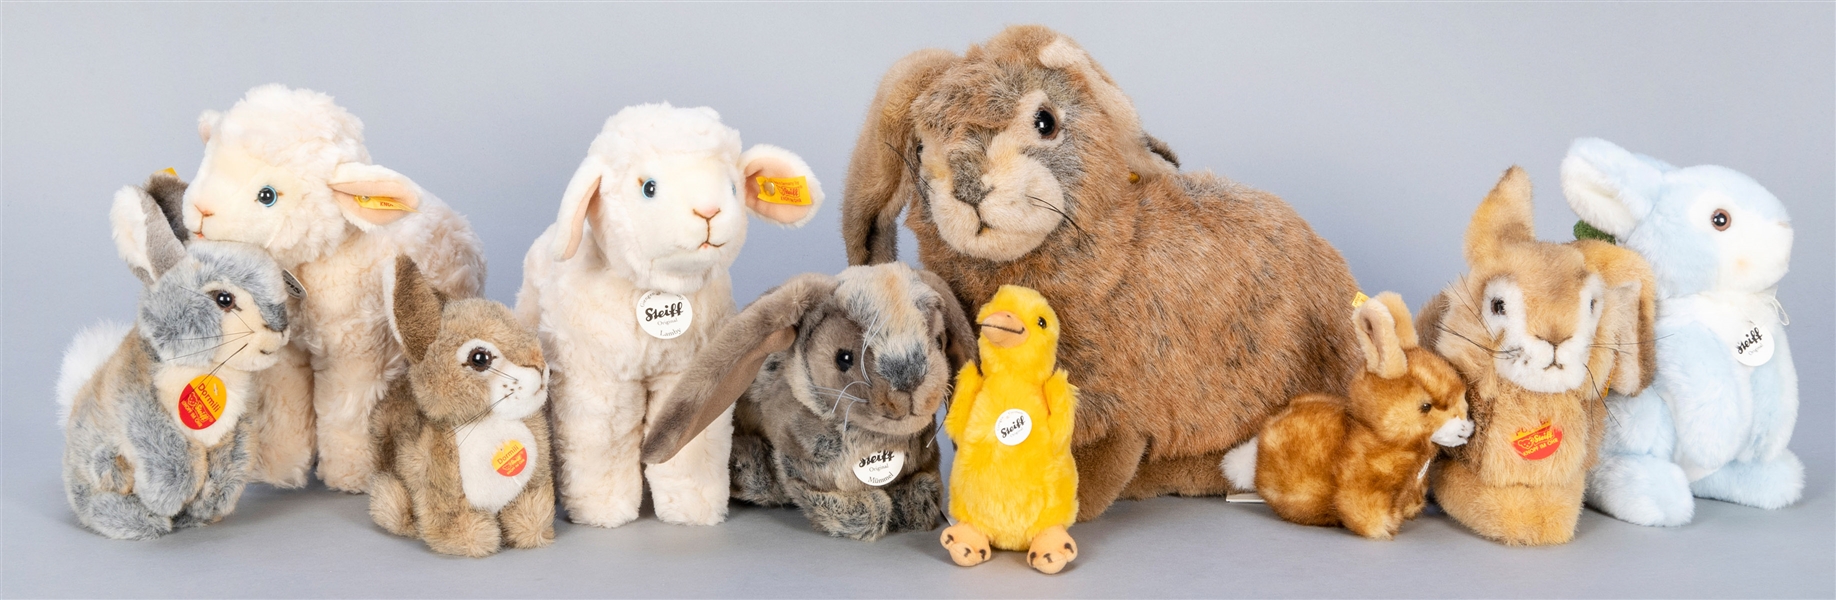  Steiff Rabbits and Easter Plush Animals Group (11). Eleven ...